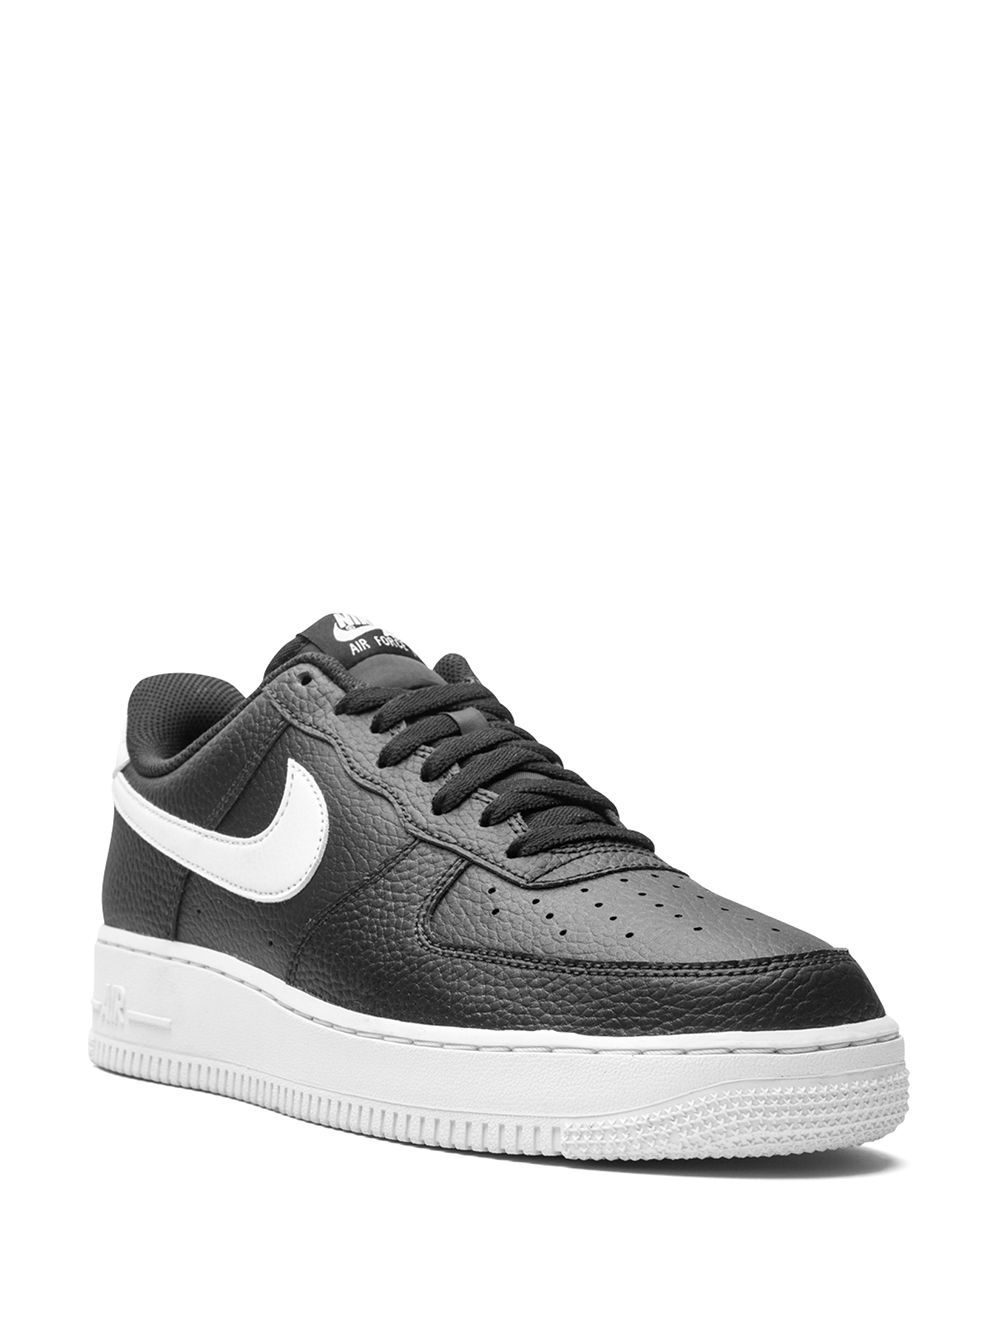 Air Force 1 Low '07 "Black/White" sneakers - 2